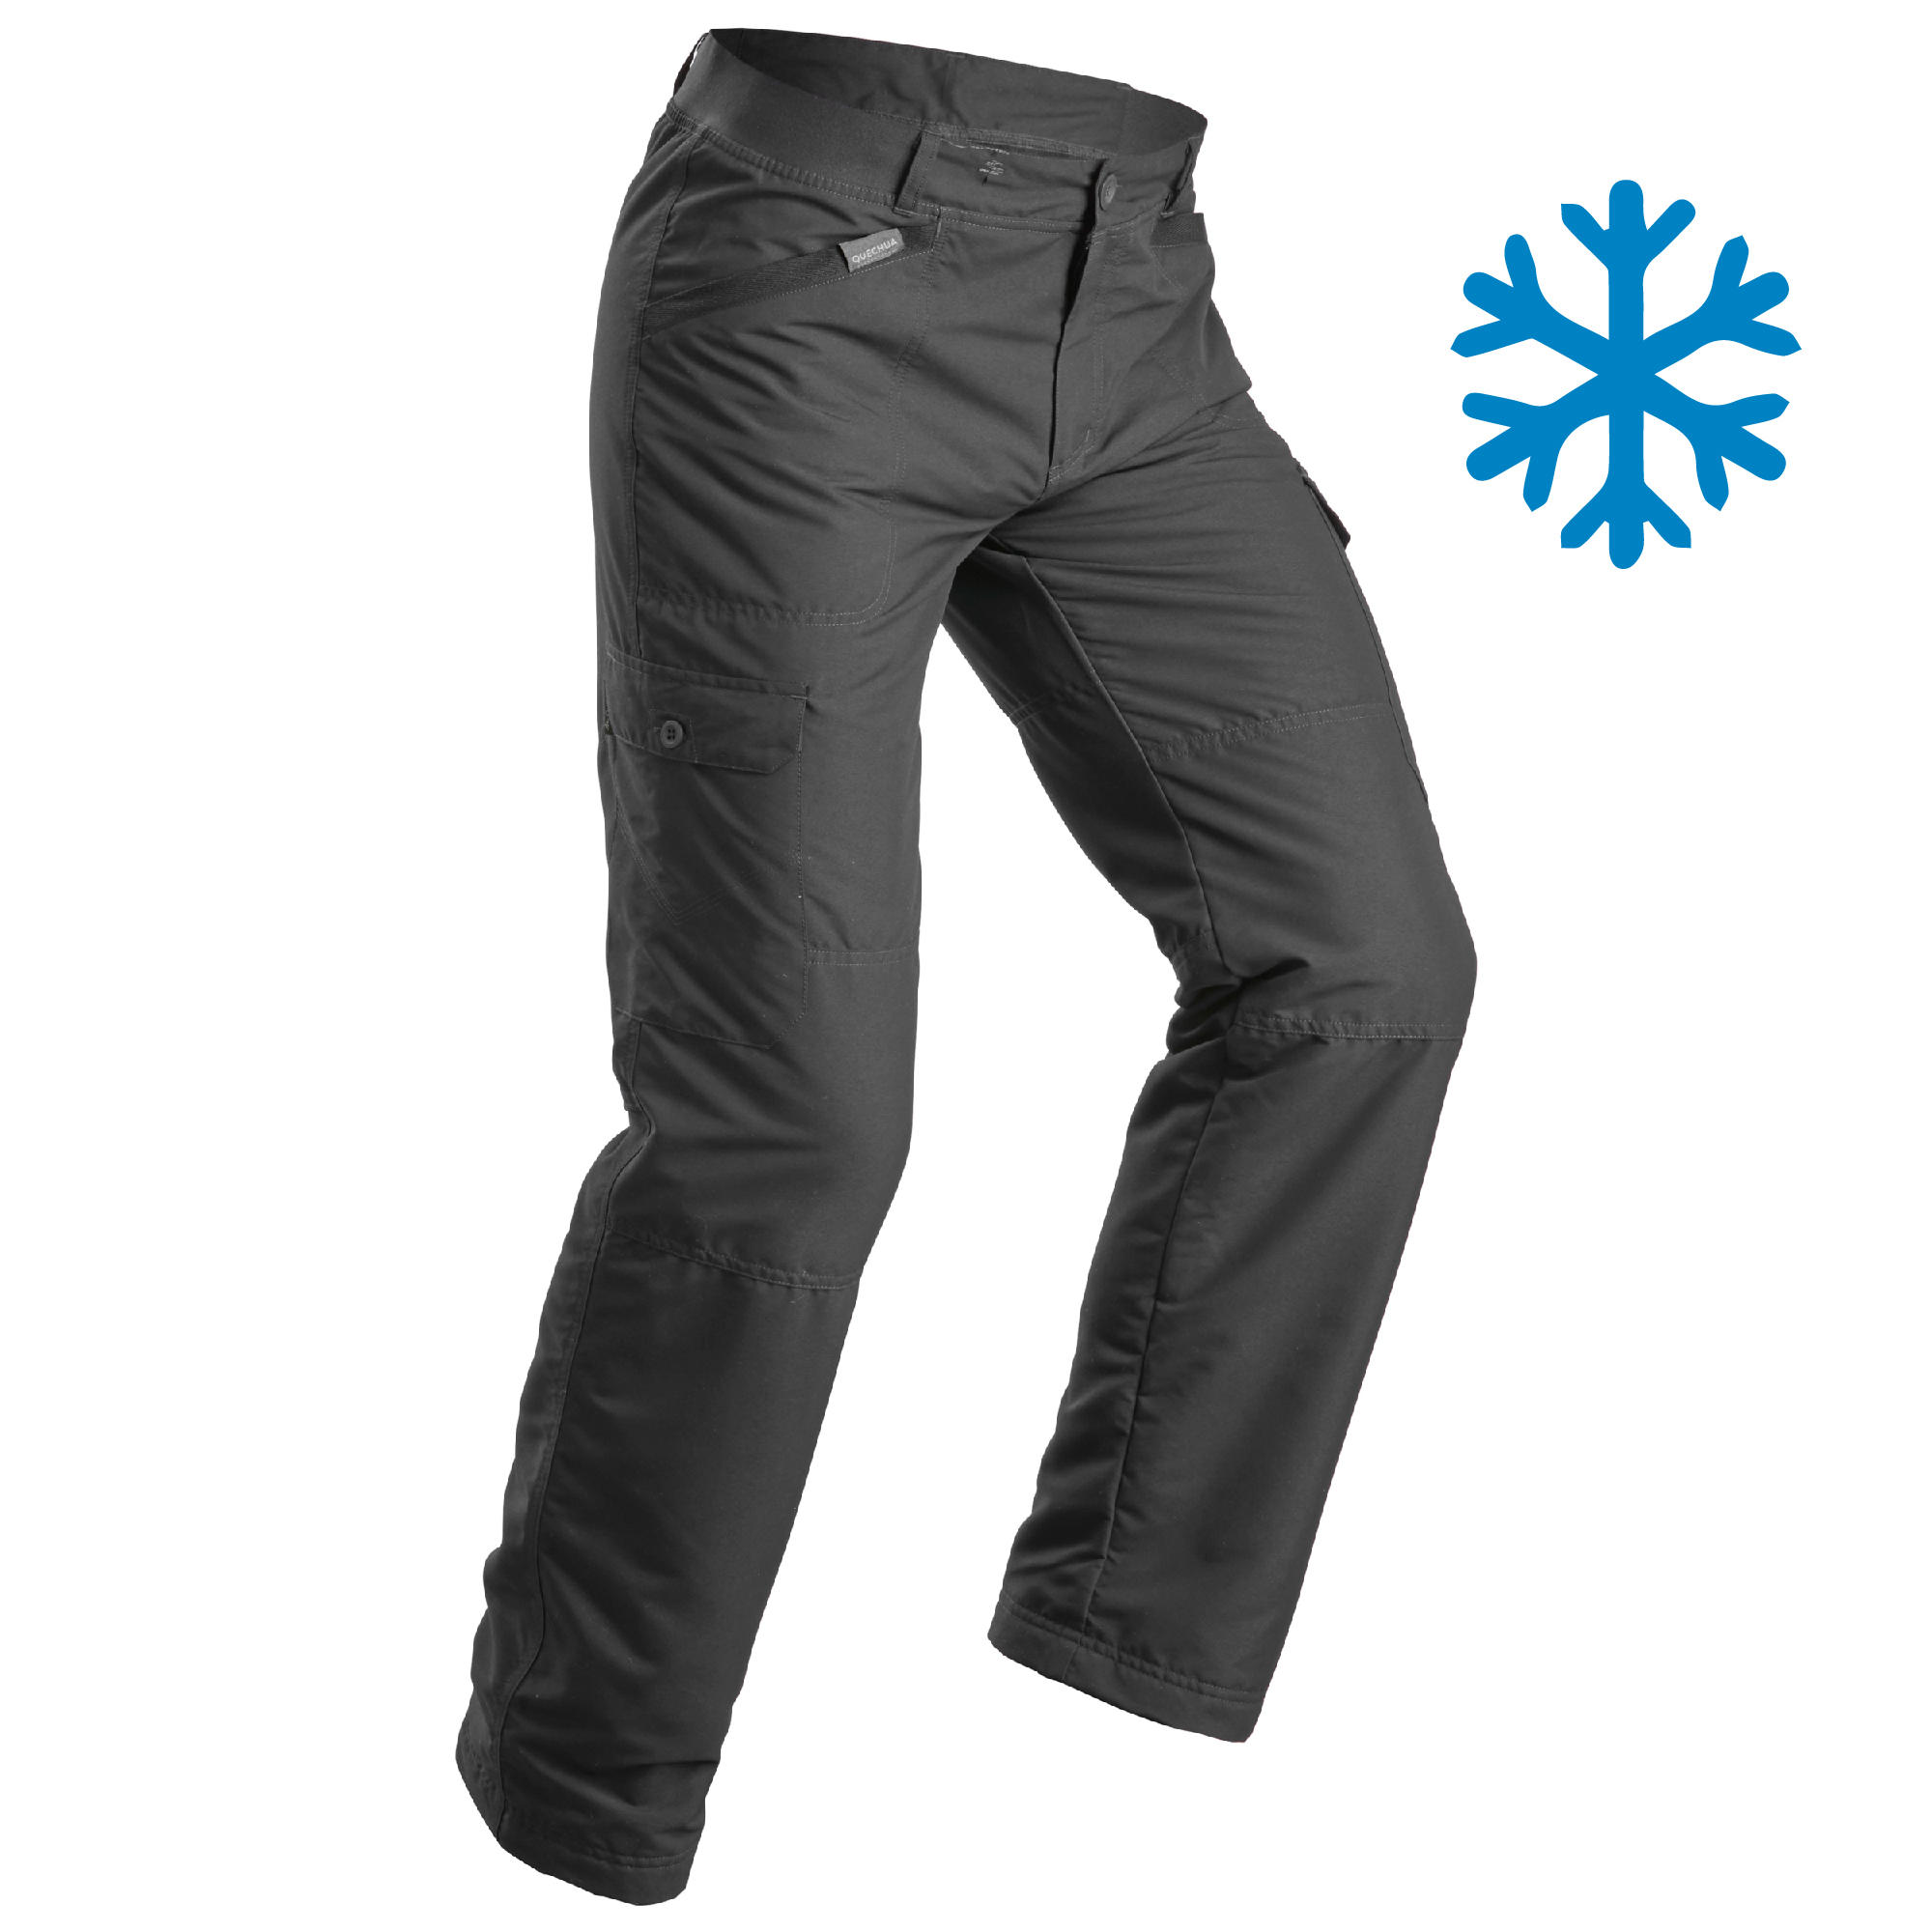 Buy Mens Trousers Online at Decathlon India